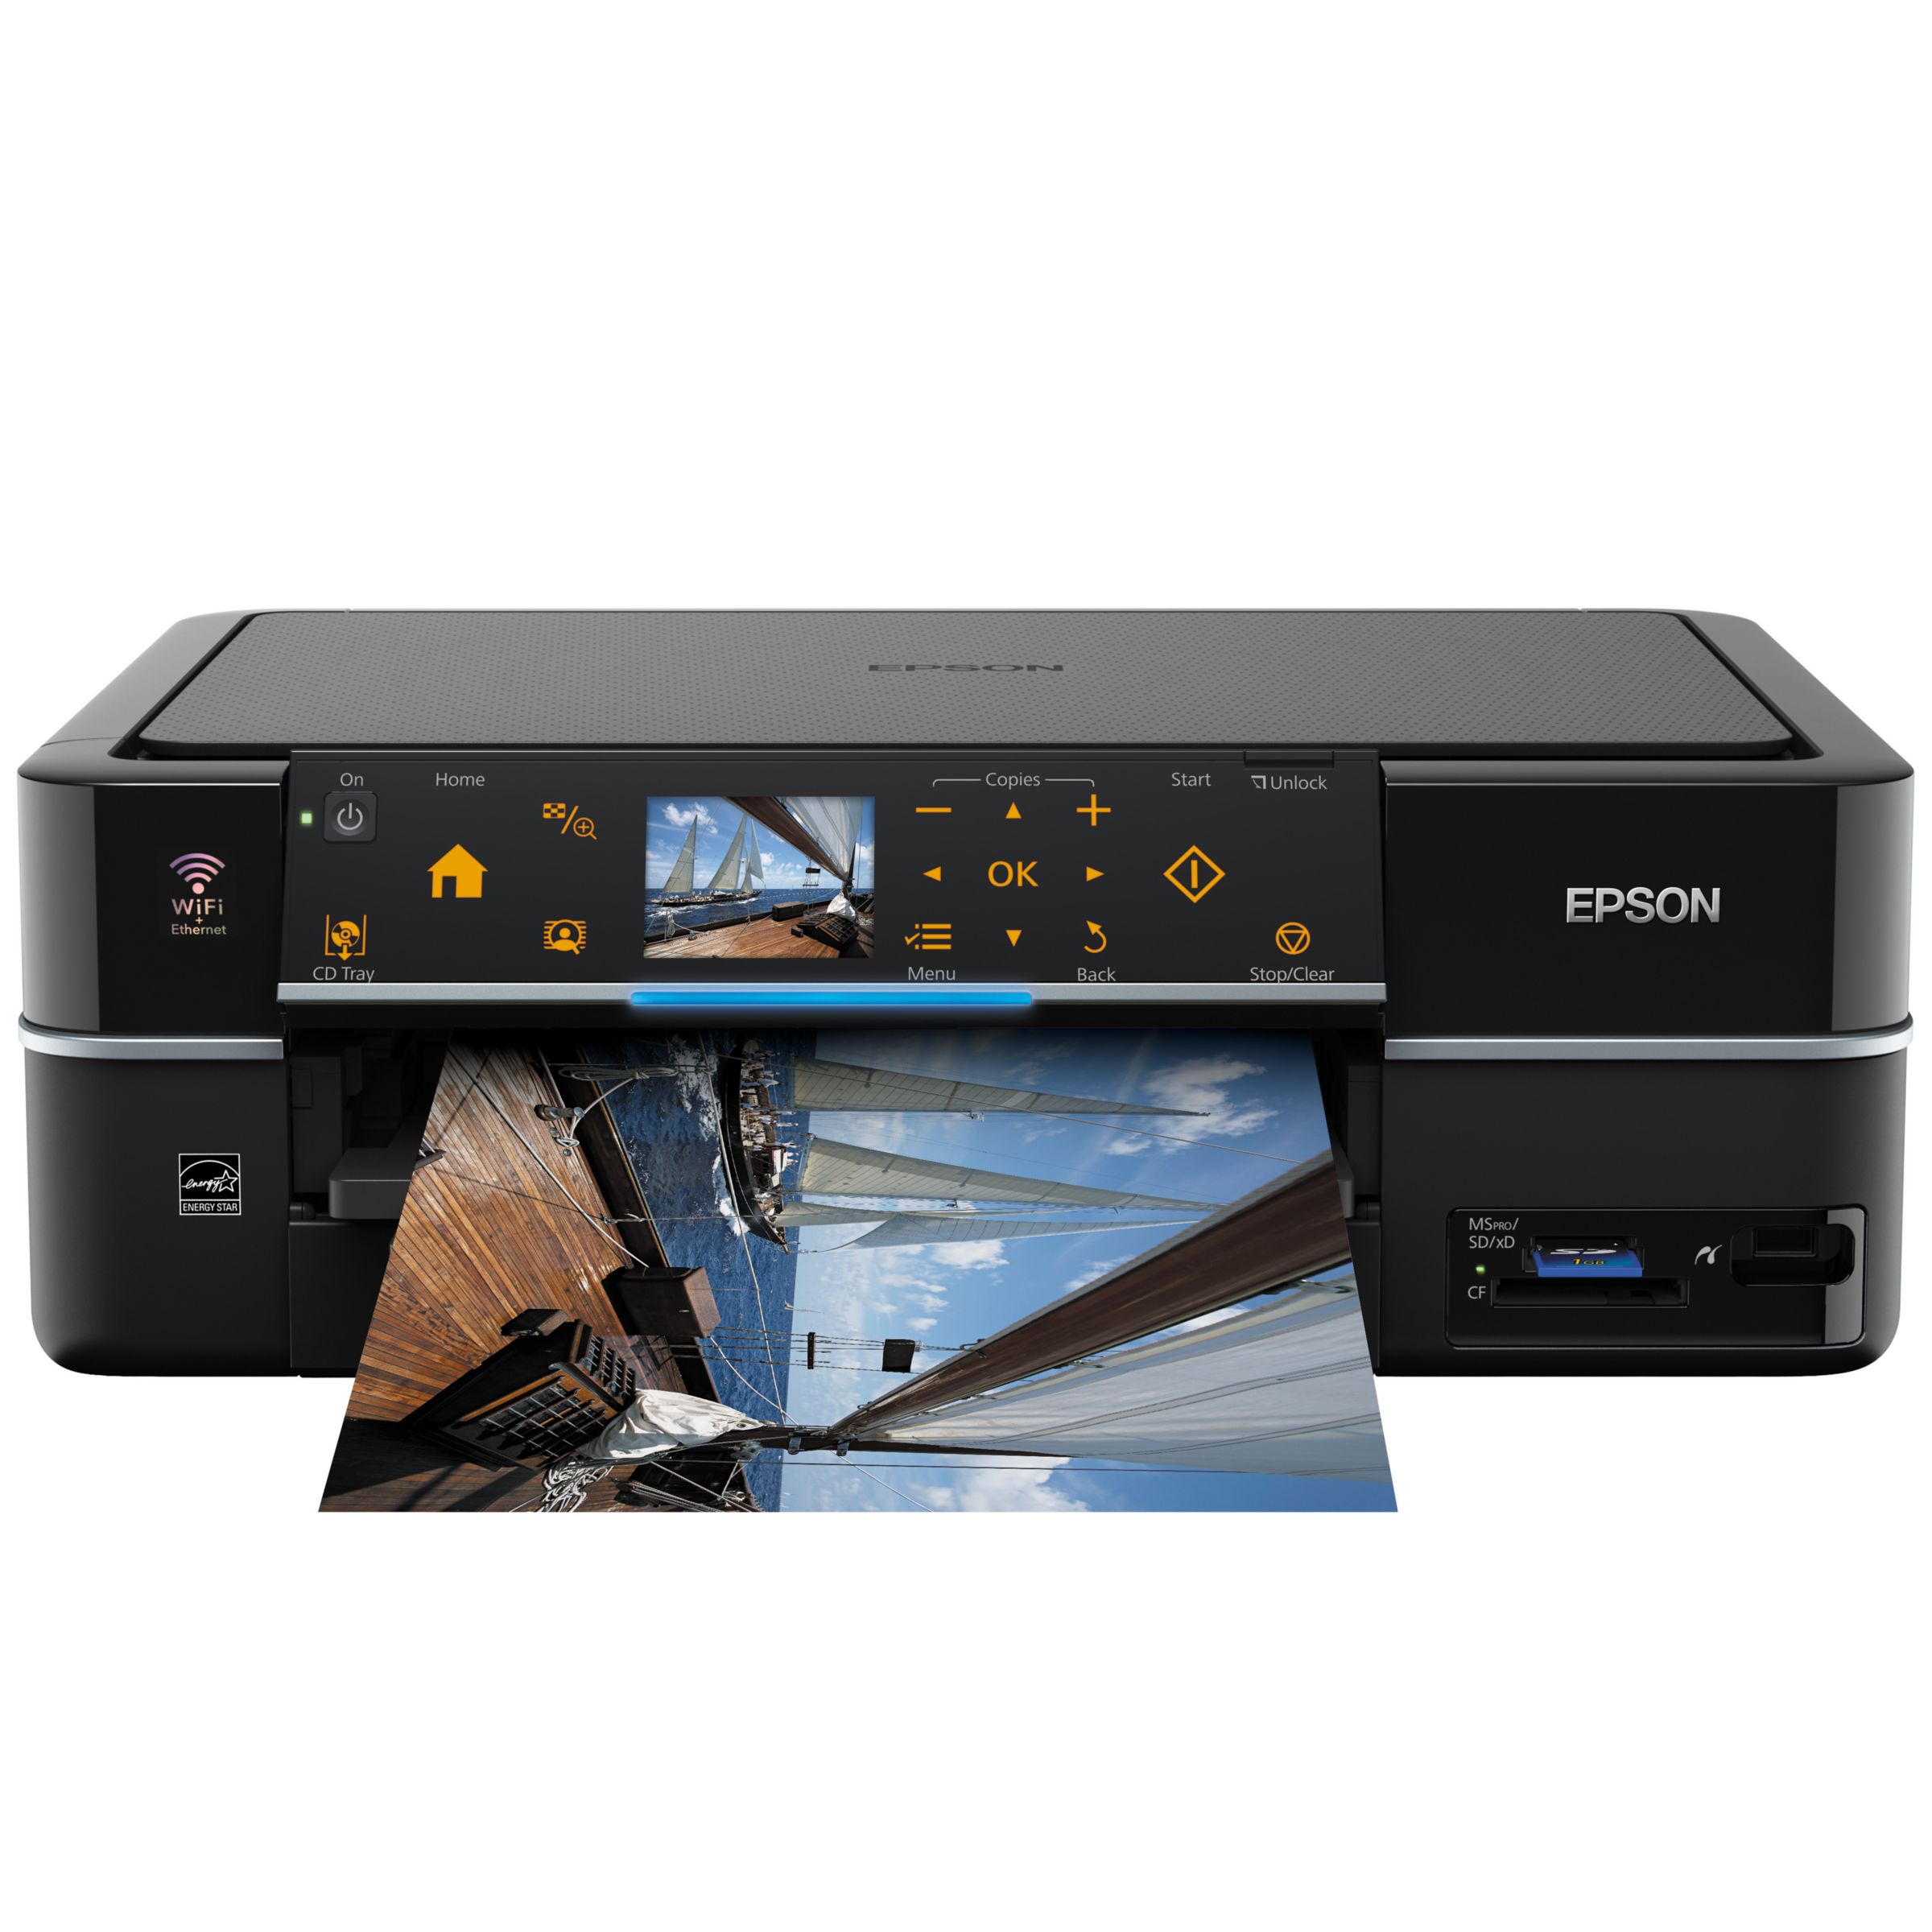 Epson Stylus PX720WD Wireless All-In-One Printer at John Lewis